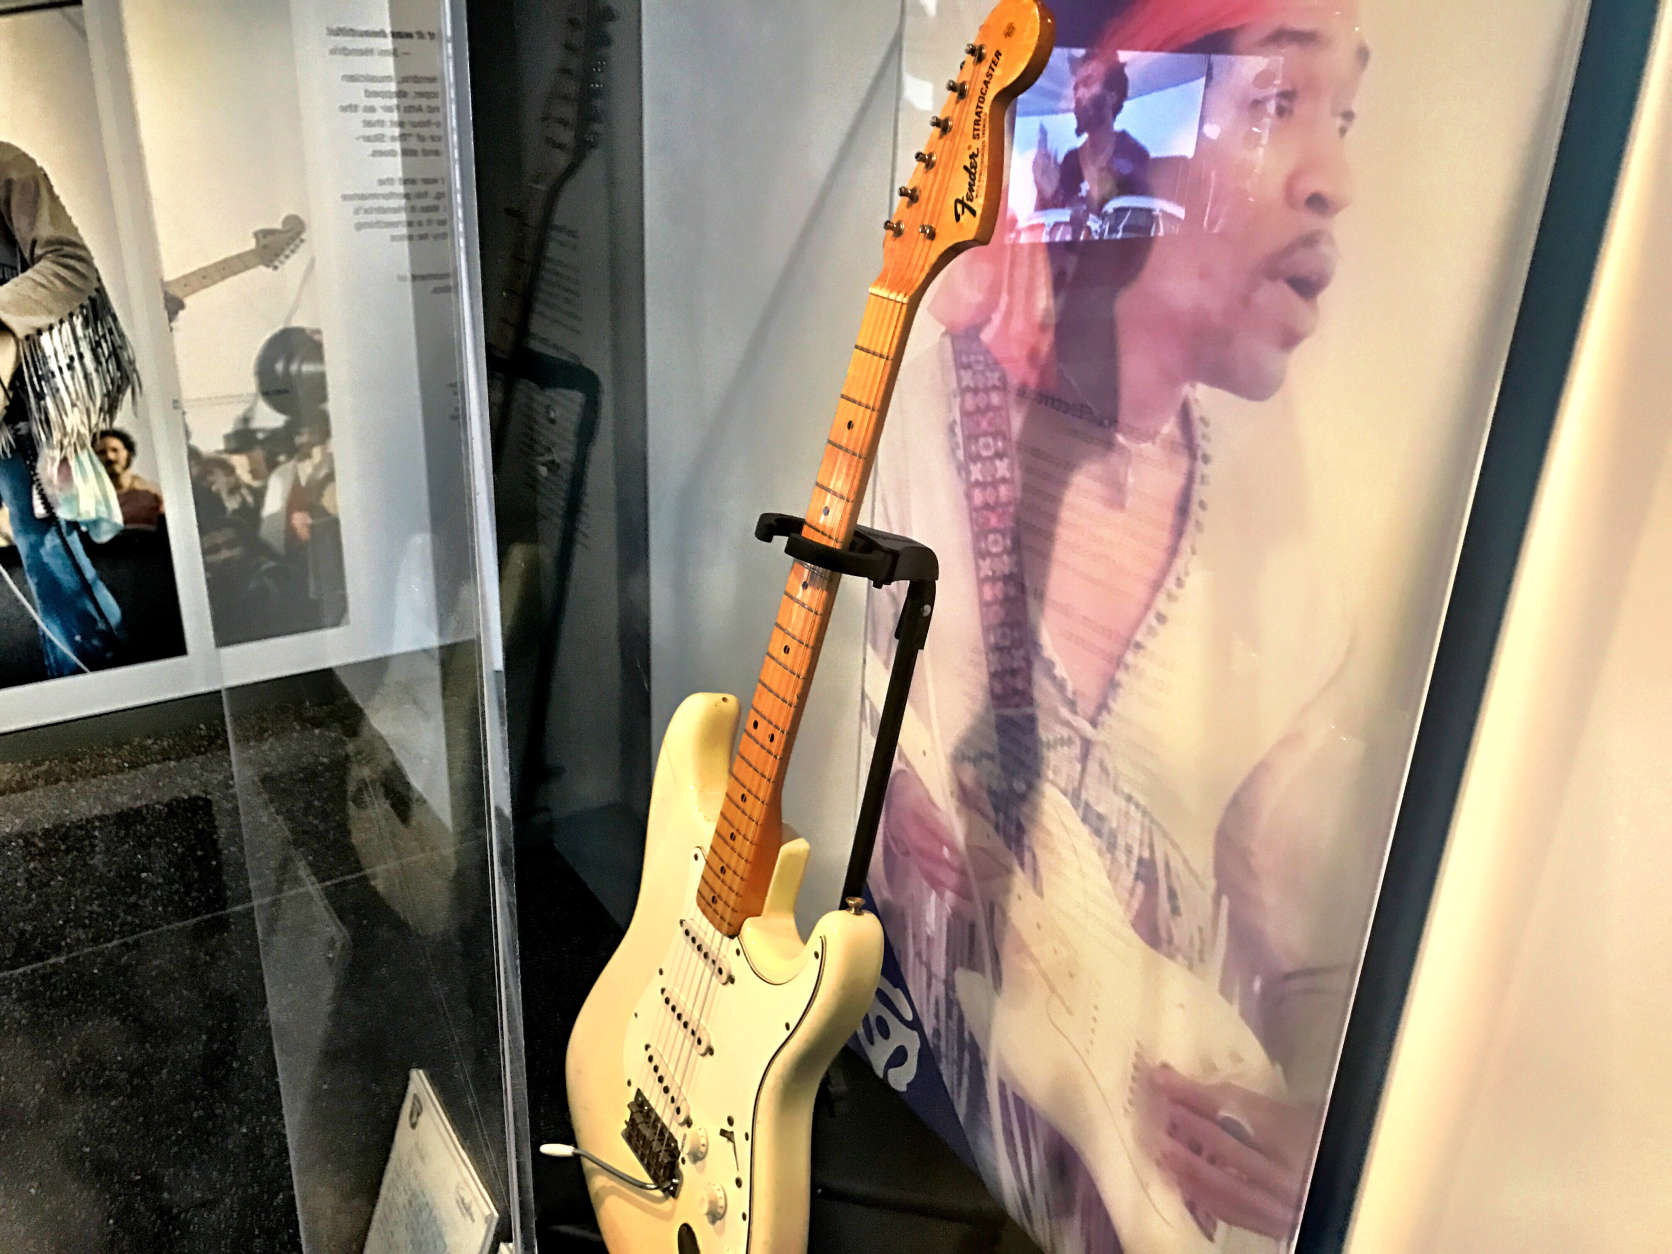 The Fender Stratocaster guitar Jimi Hendrix used to play the Star Spangled Banner at Woodstock, on display at the Newseum. (WTOP/Neal Augenstein